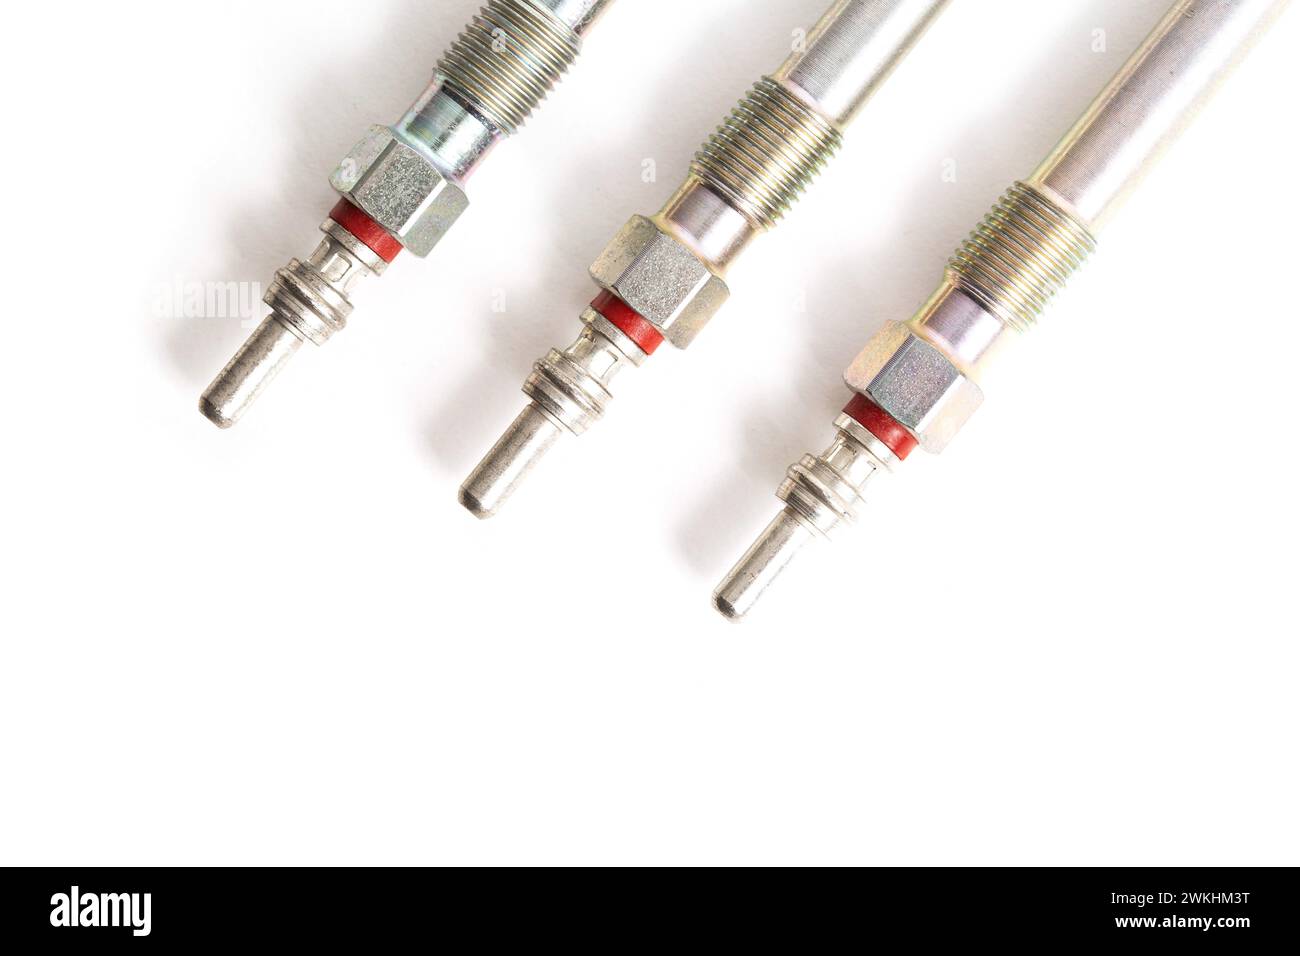 Rod ceramic glow plugs for a diesel engine on a white background, close-up, isolate. Stock Photo